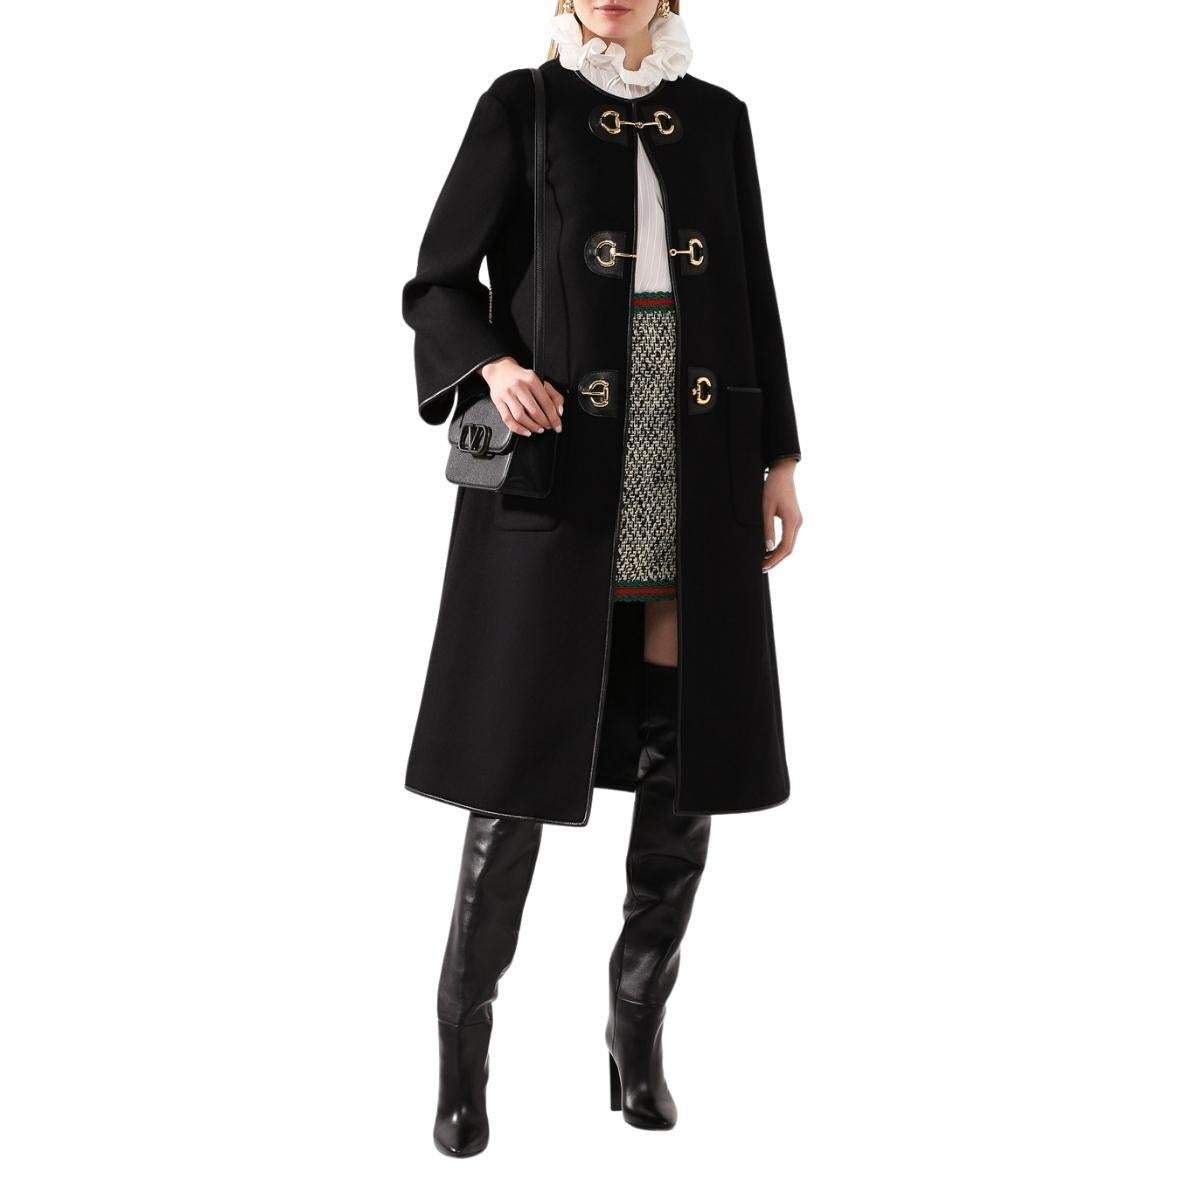 Gucci's Horsebit detail is presented in a gold-tone on the toggle fastenings through the front of this black wool-blend coat. Designed with a minimal single-breasted profile, the style is trimmed with leather for a refined finish. 
Round neck
Toggle